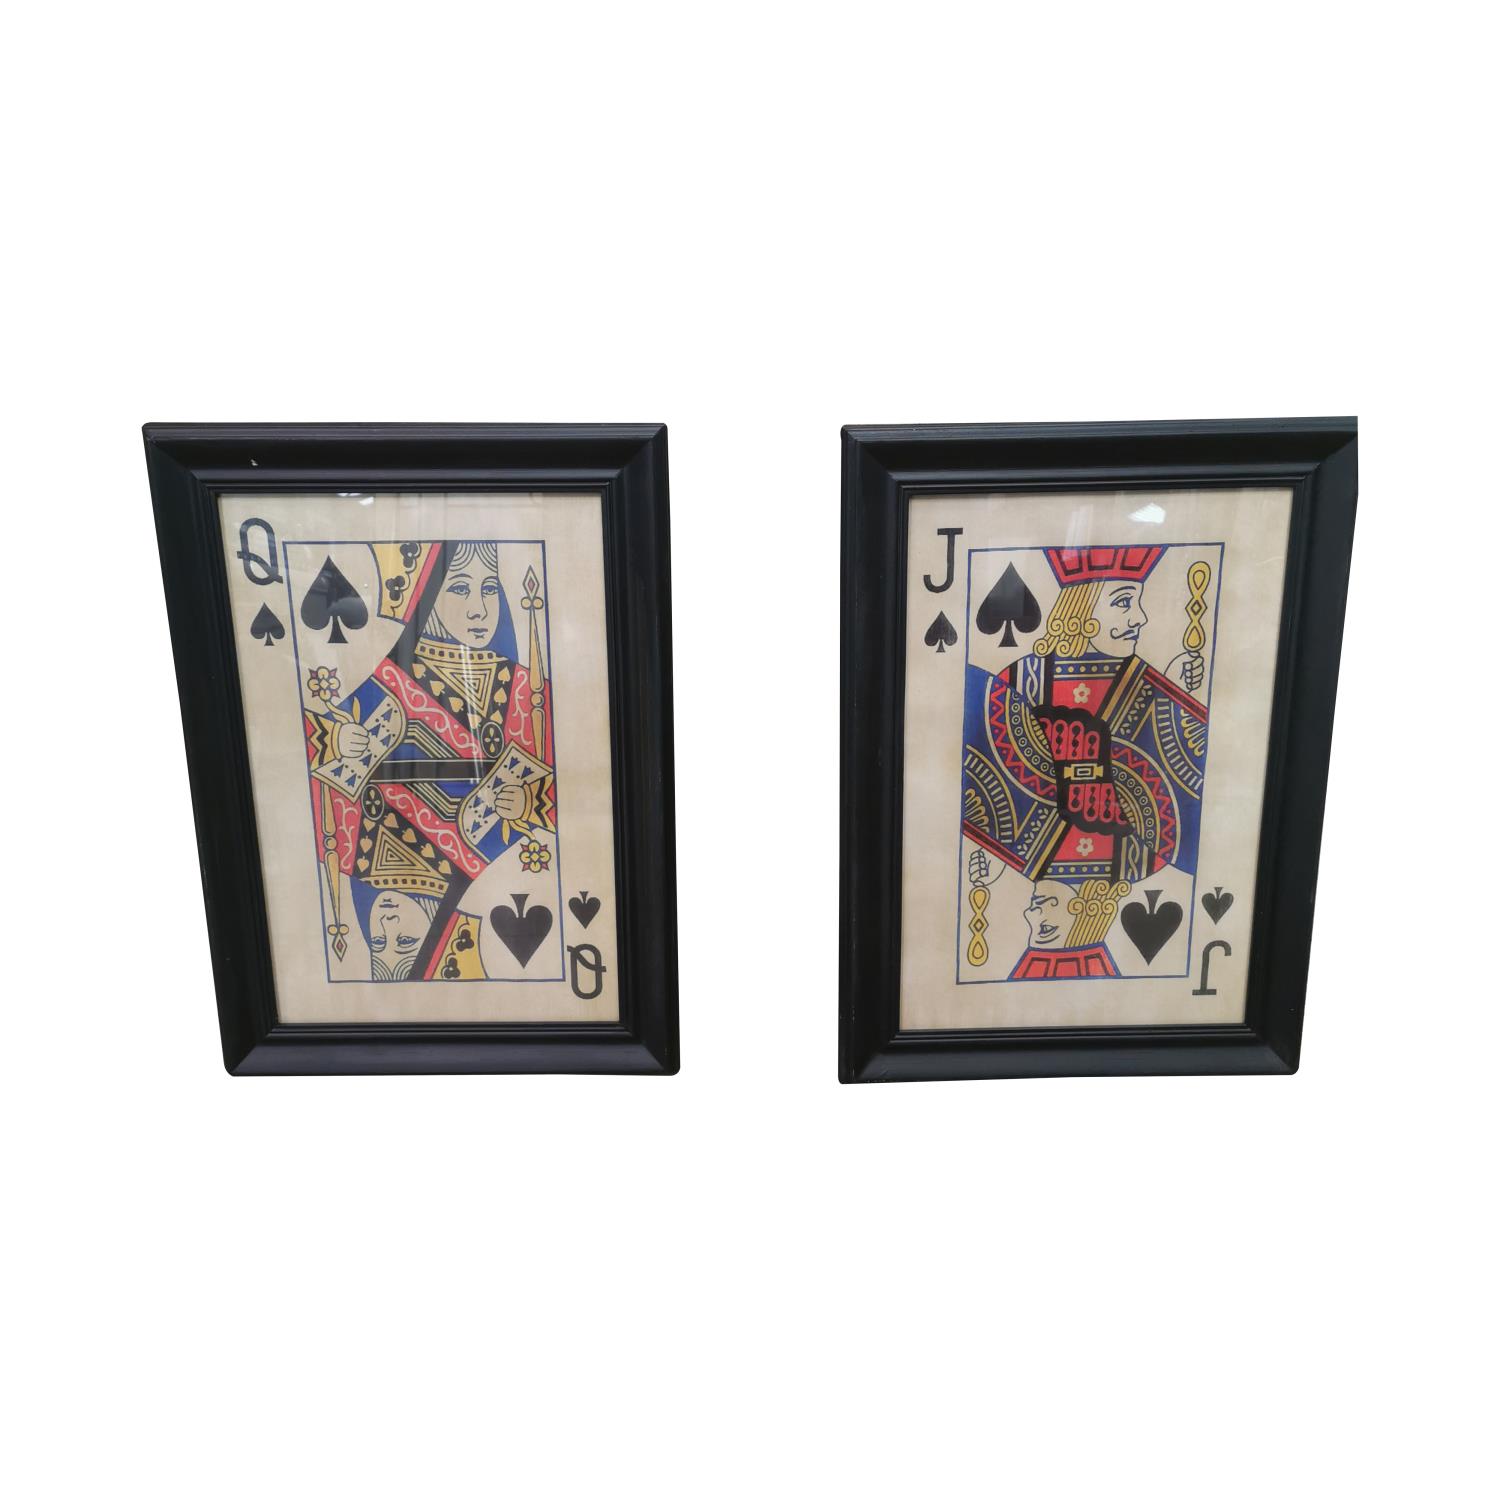 Queen of Clubs and Jack of Clubs coloured prints